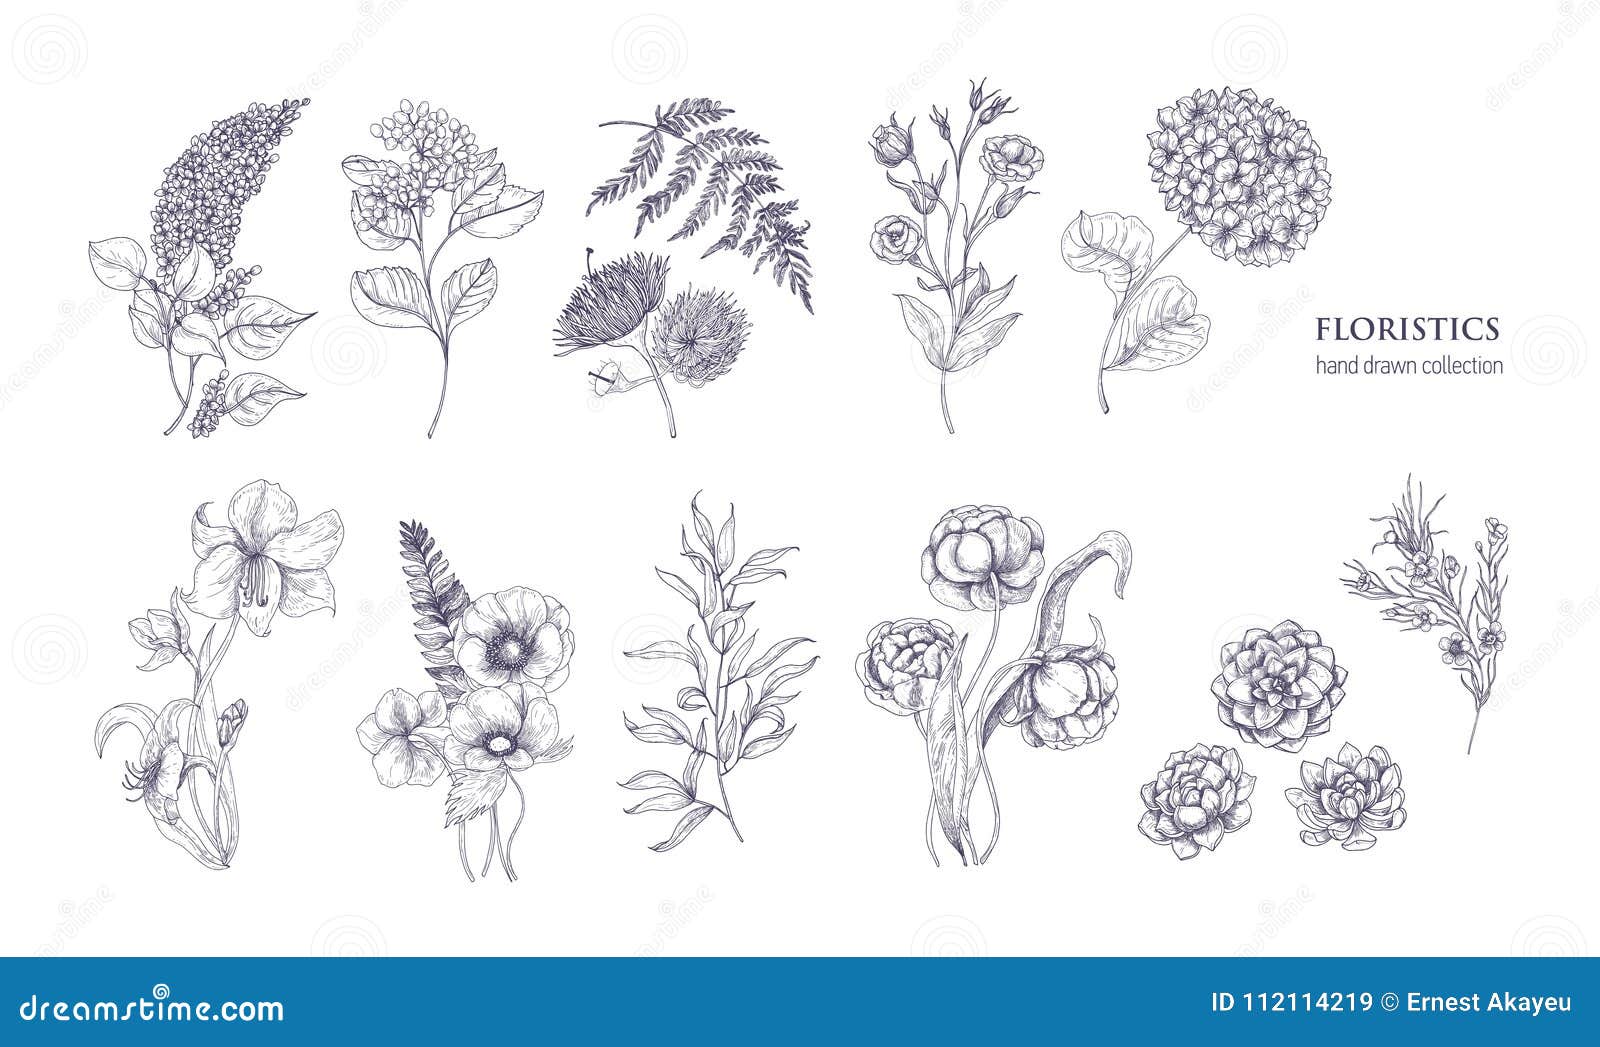 collection of gorgeous floristic flowers and wild flowering plants hand drawn with black contour lines on white